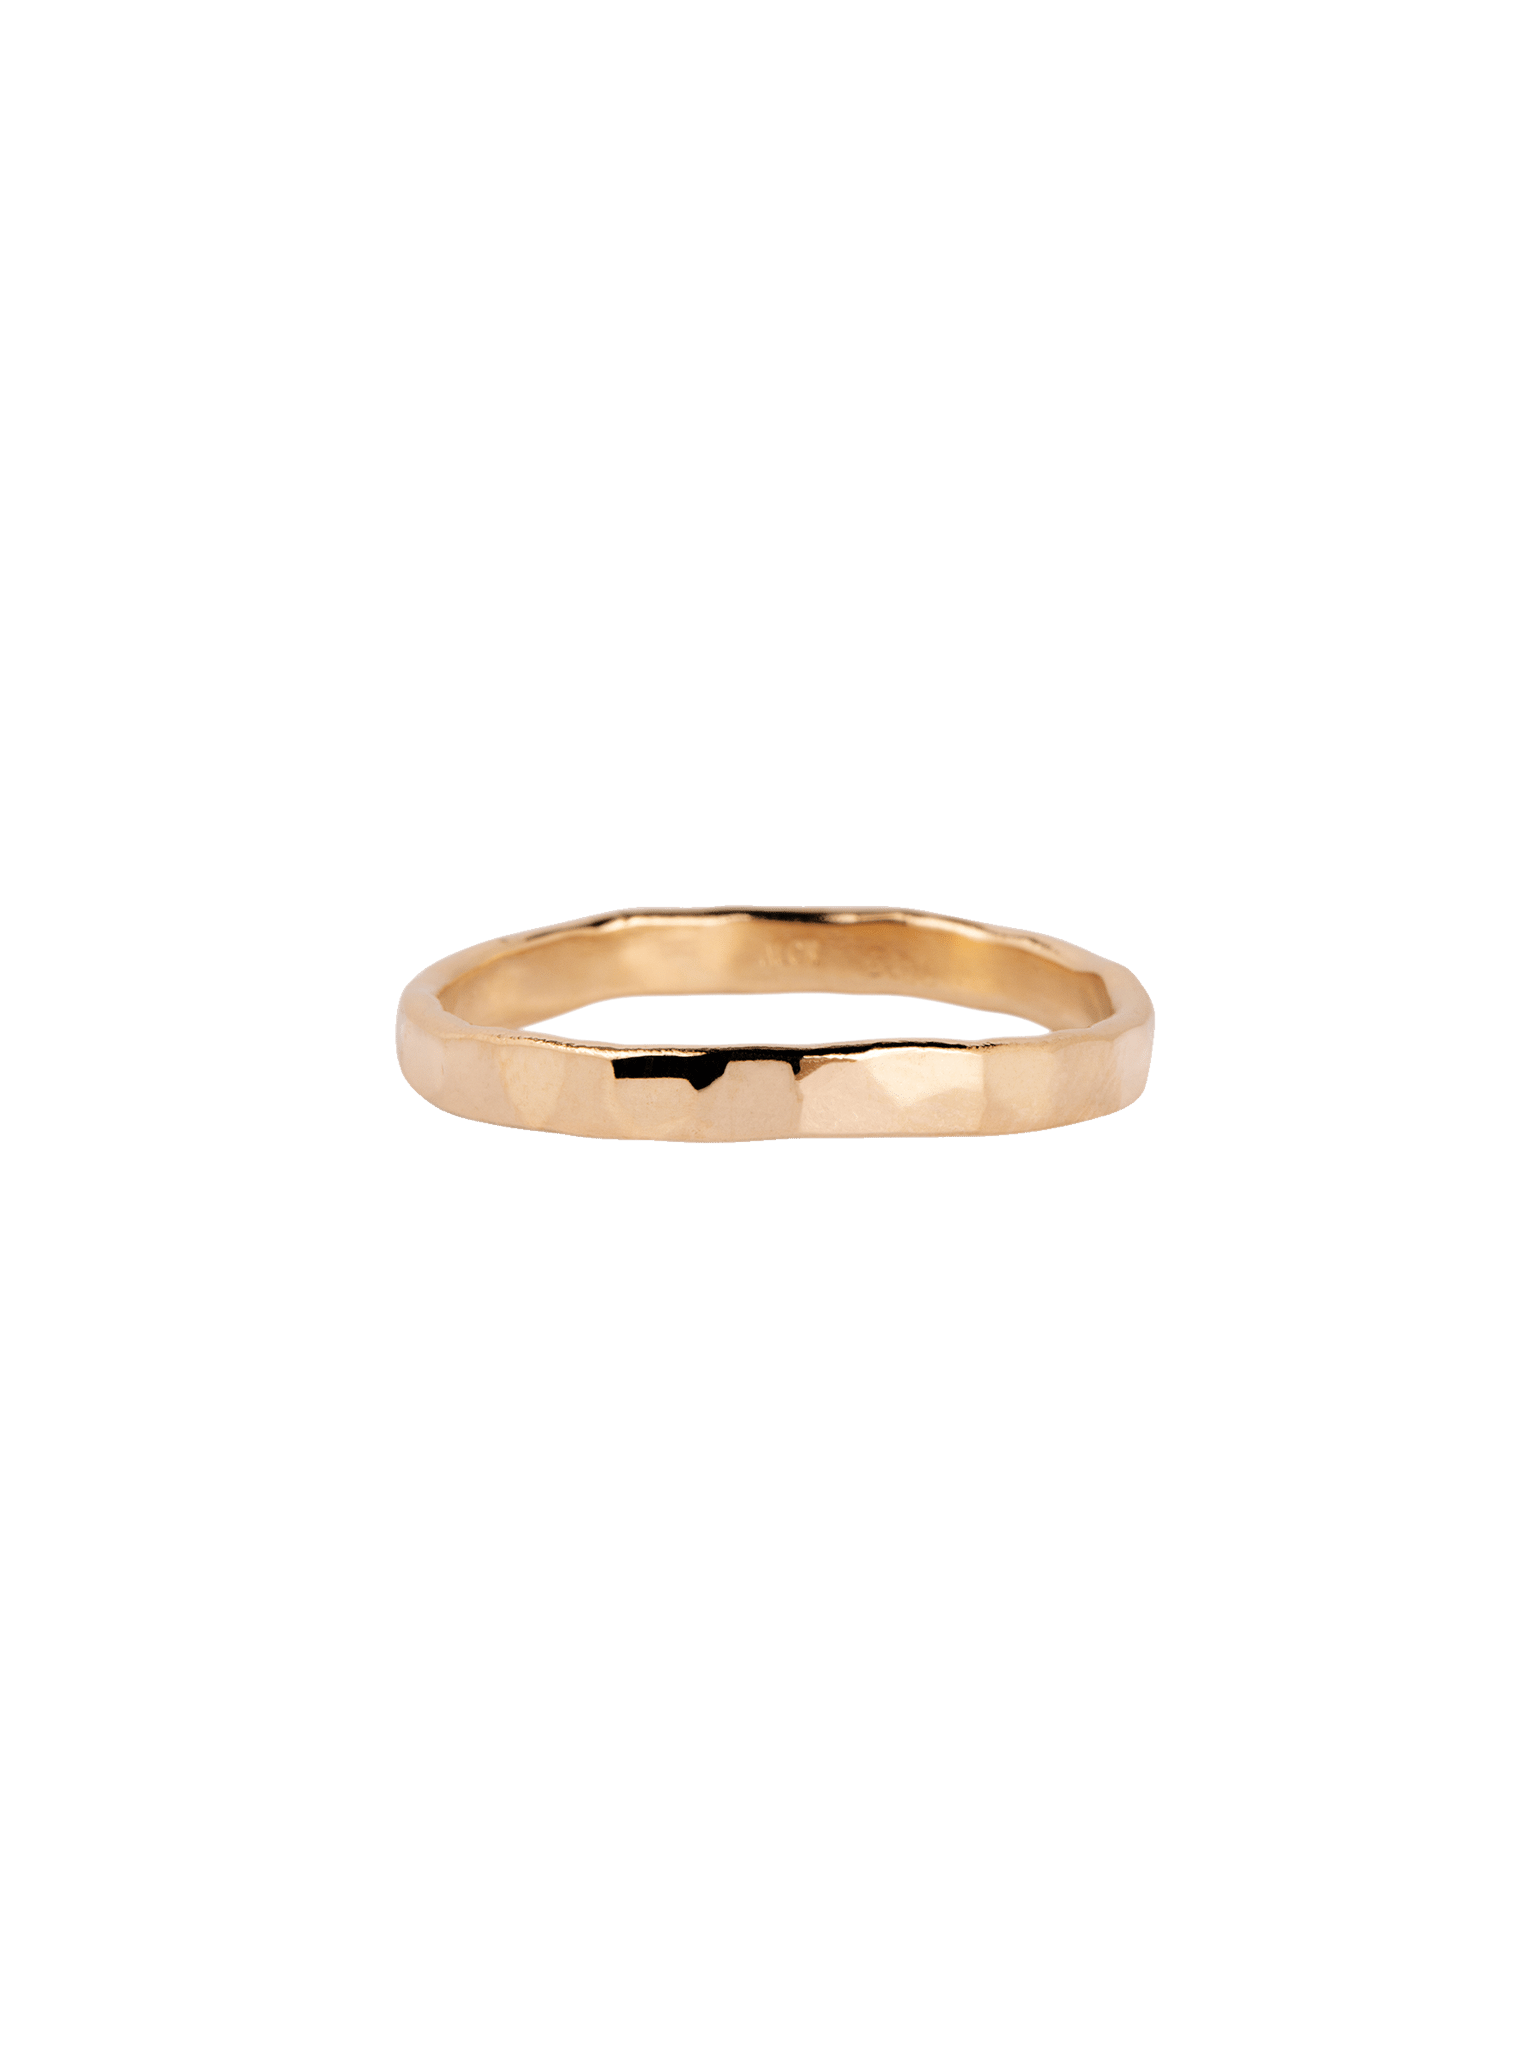 Hammered ring 